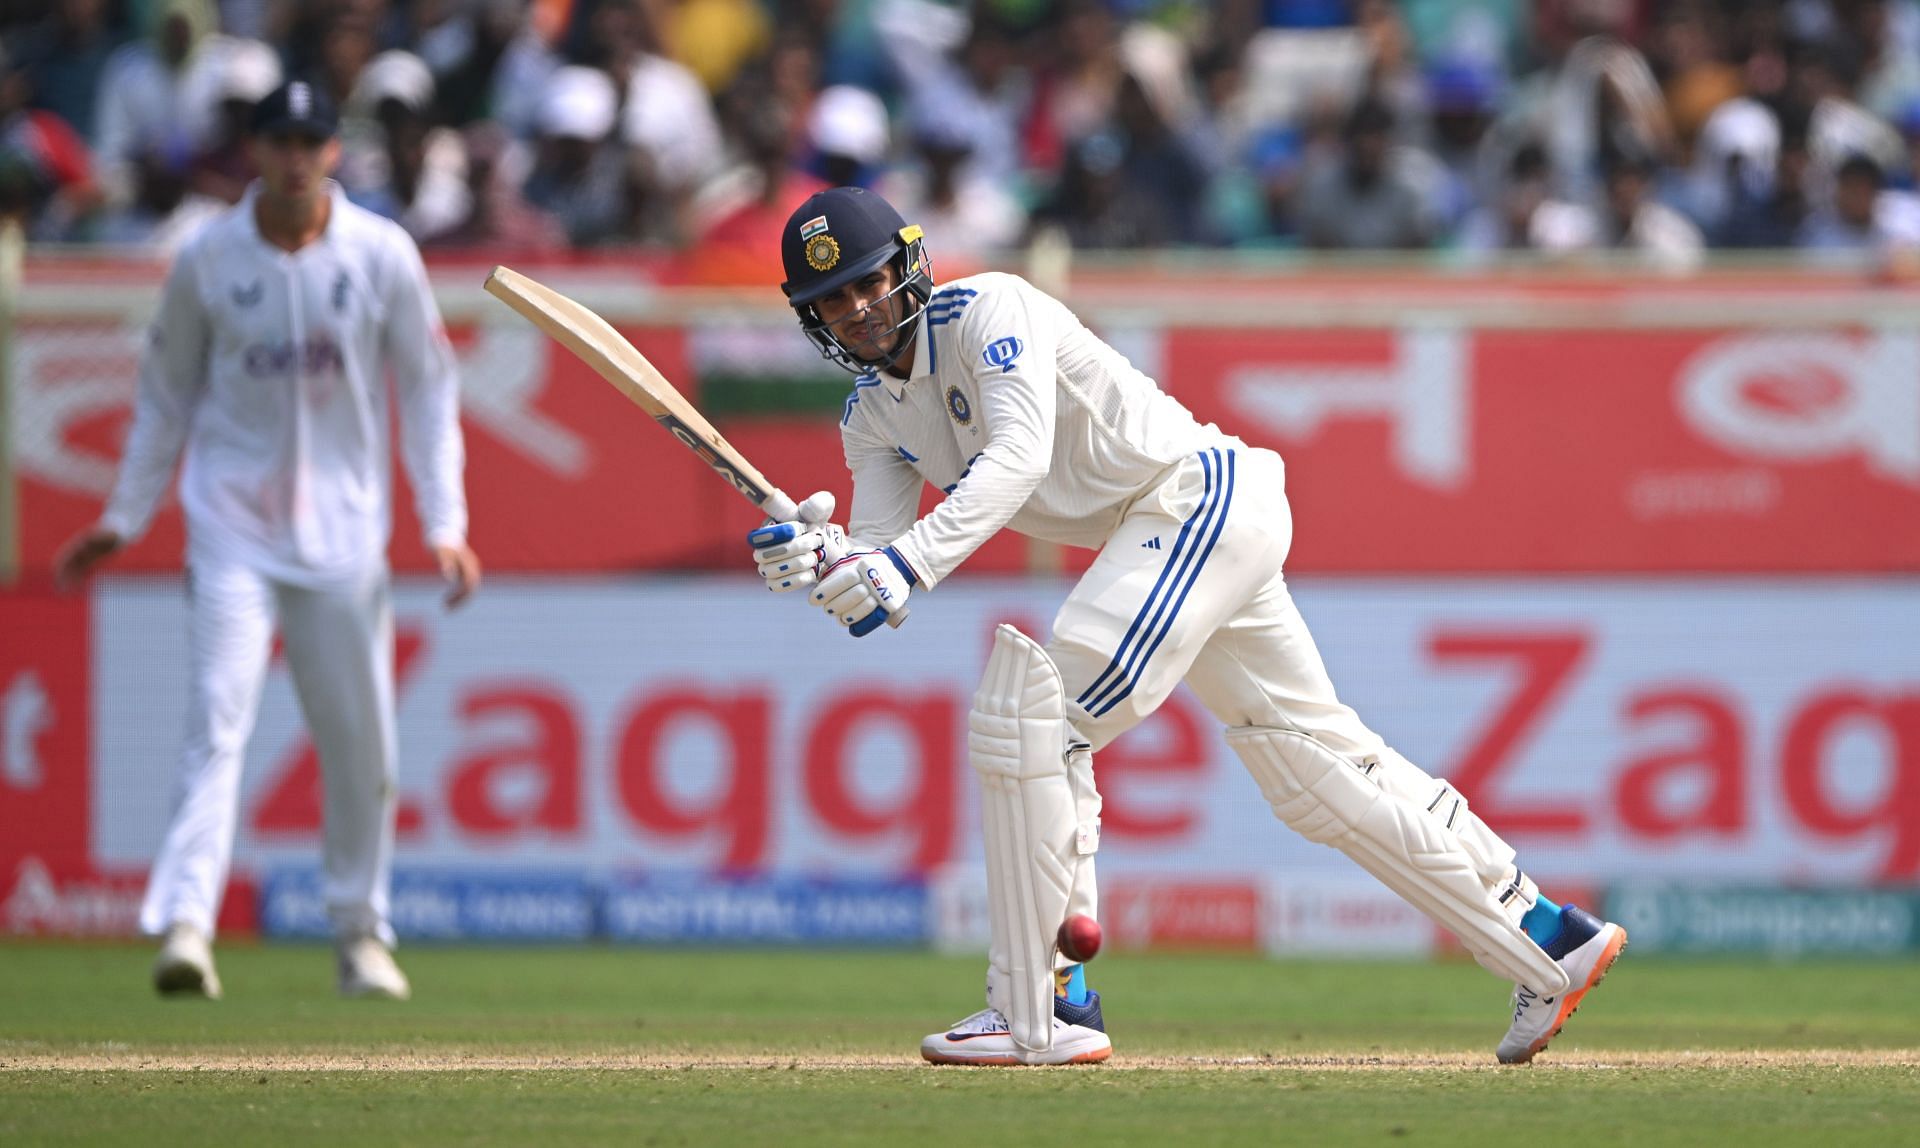 Shubman Gill hit a century in the second essay: India v England - 2nd Test Match: Day Three